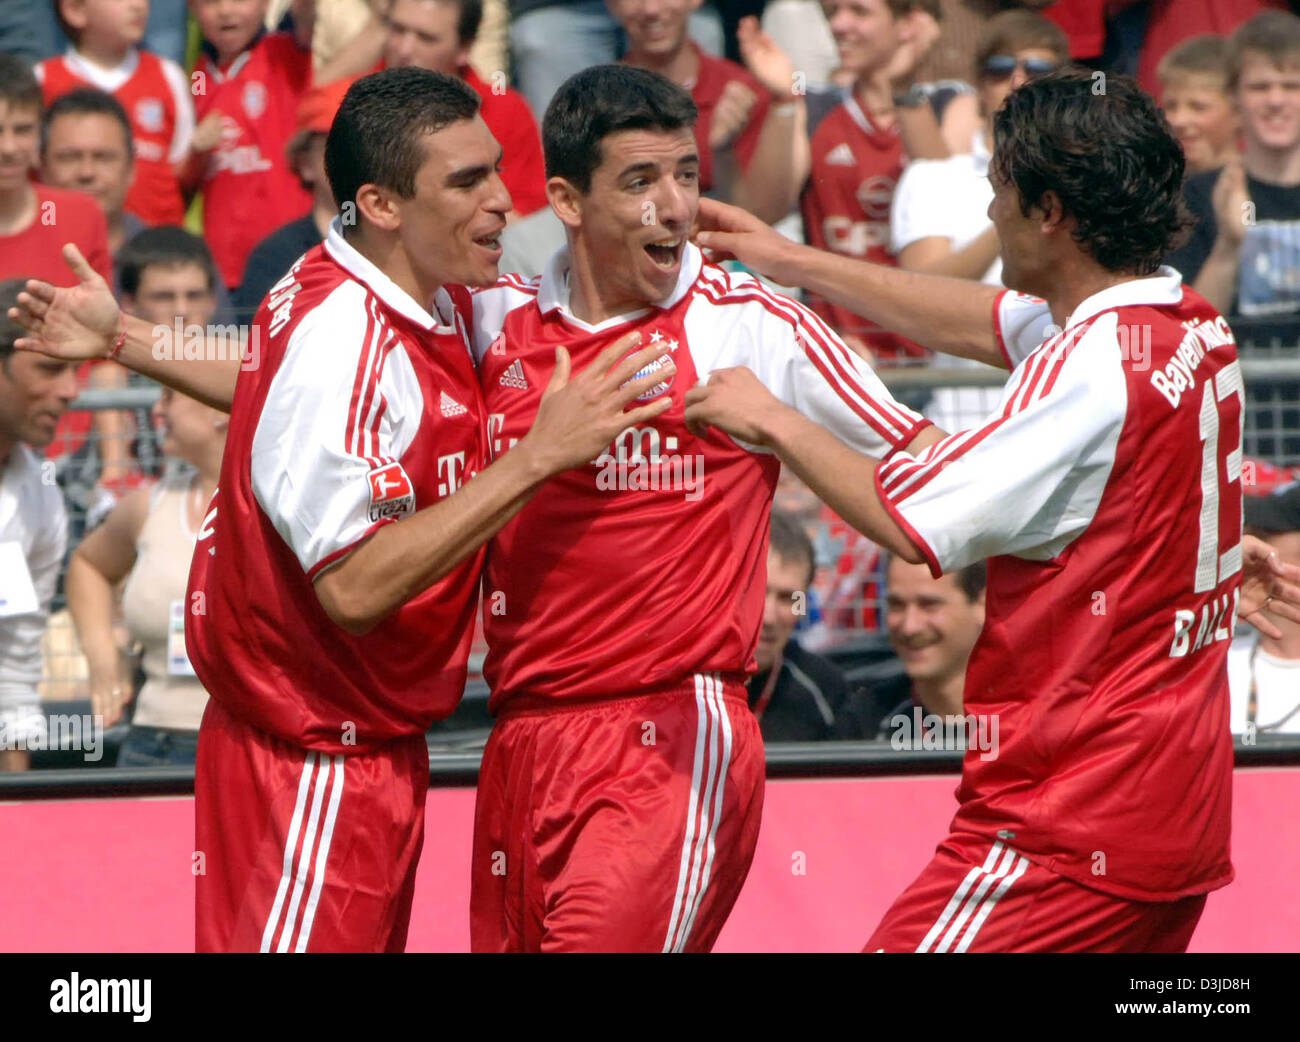 (dpa) - FC Bayern Munich's Lucio, Roy Makaay and Michael Ballack (from L-R) celebrate a goal during the German Bundesliga match against 1. FC Nuremberg at the Olympic stadium in Munich,  Germany, 14 May 2005. Stock Photo